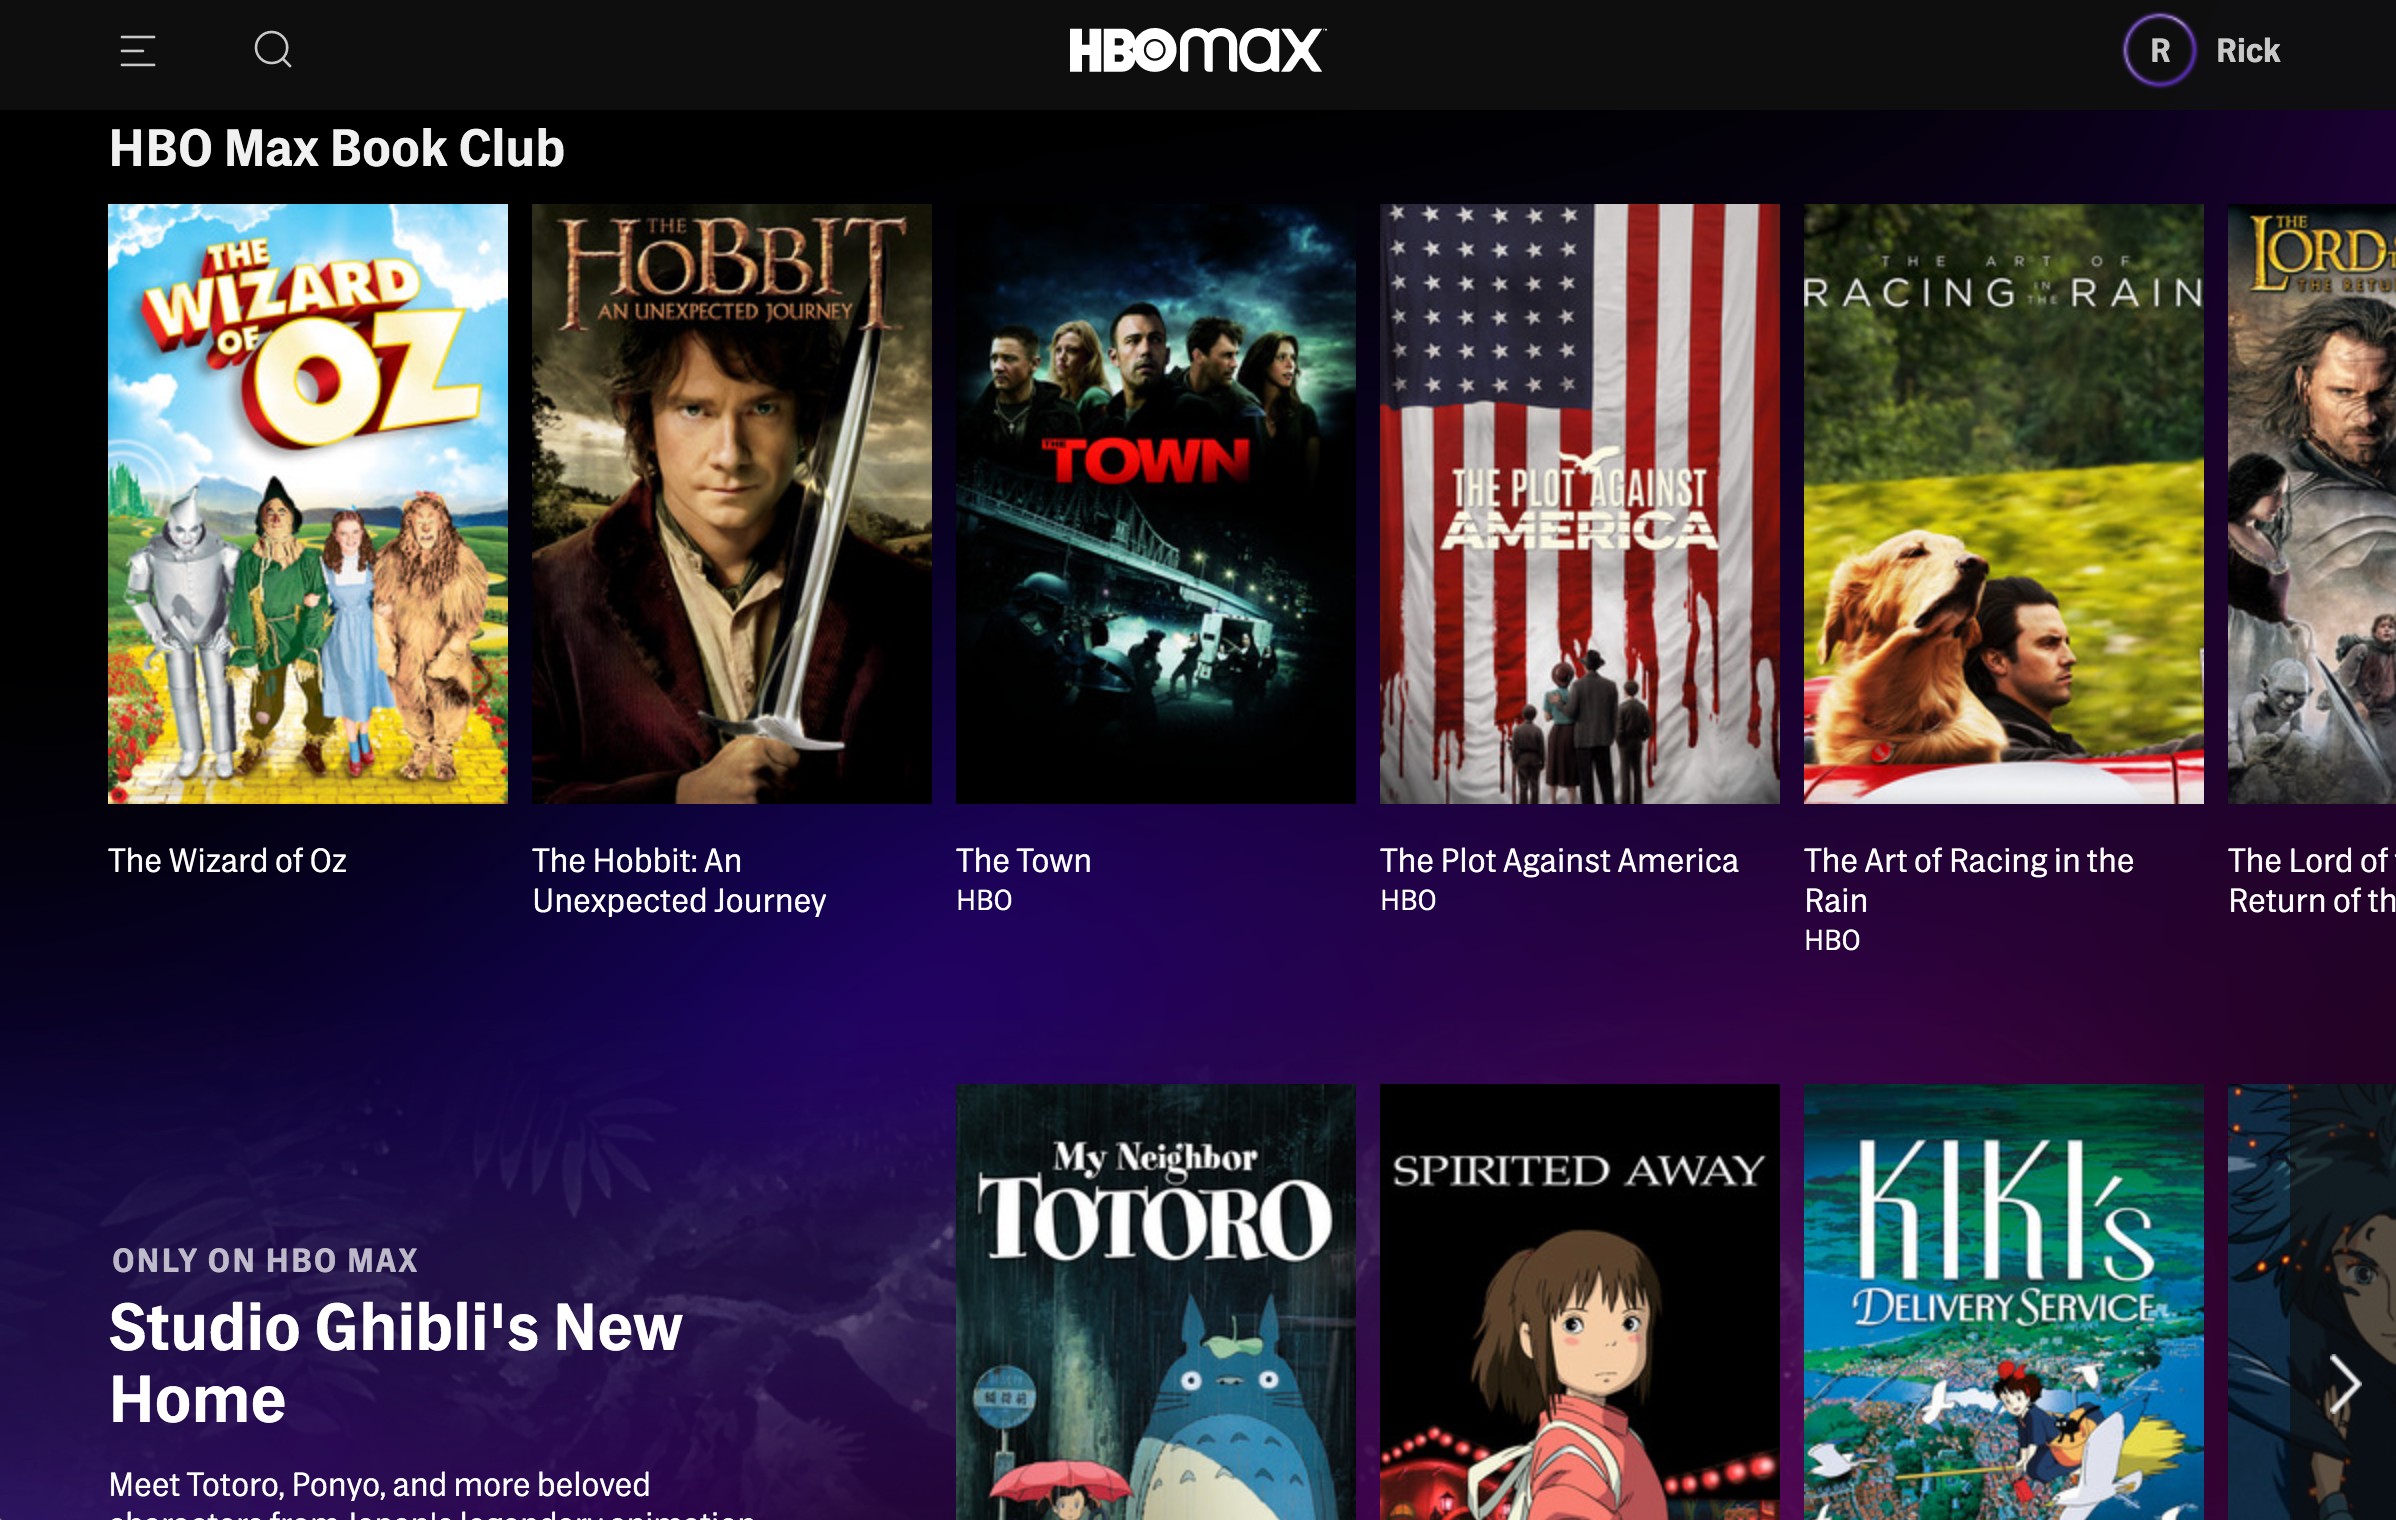 HBO Max Review: Expensive, but Its Catalog Is Packed - CNET